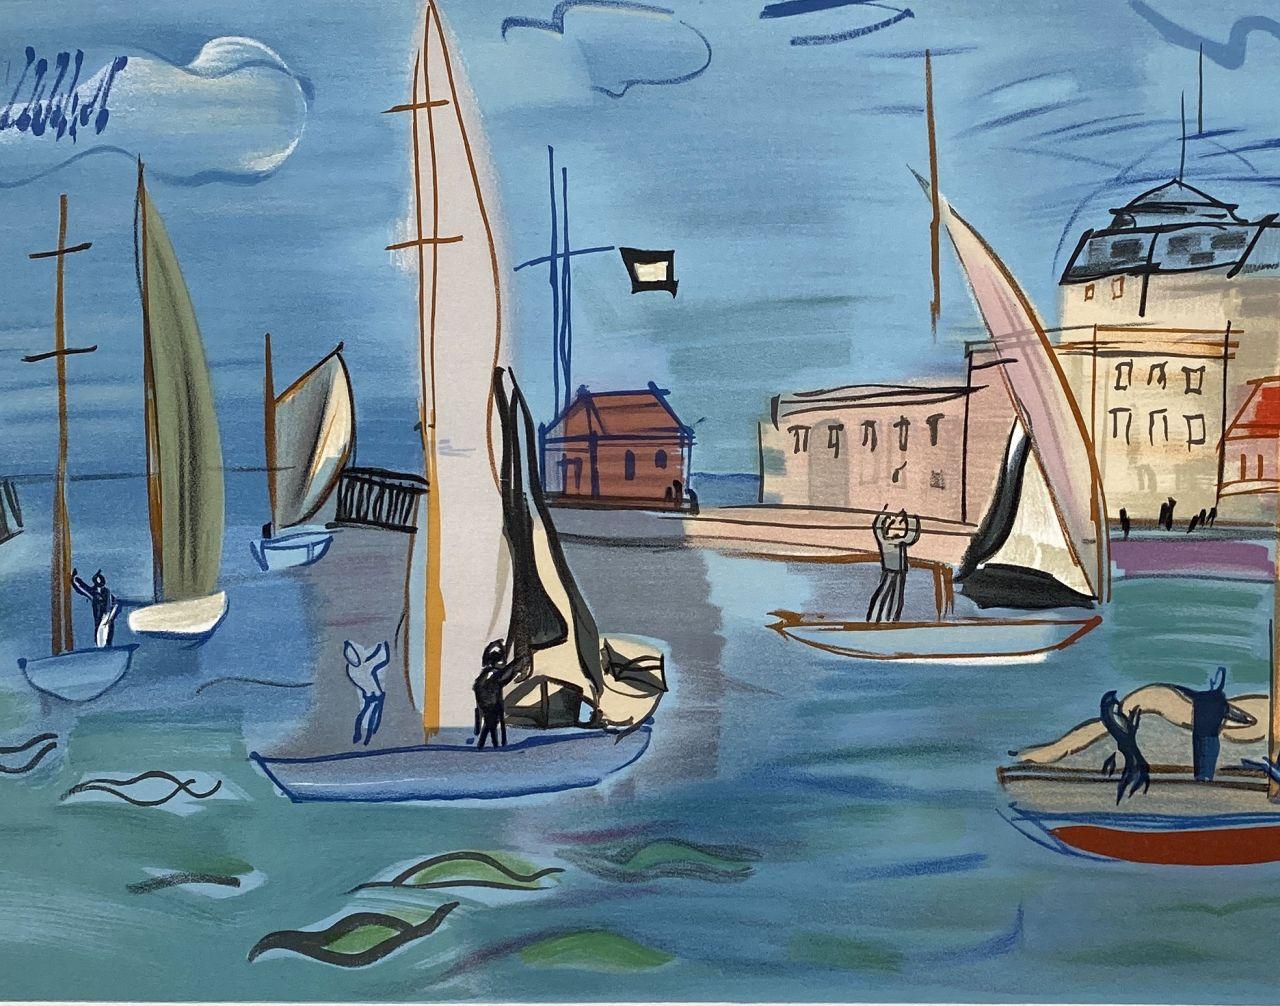 Sailboats - Lithograph Signed in the Plate (Mourlot) - Modern Print by (after) Raoul Dufy